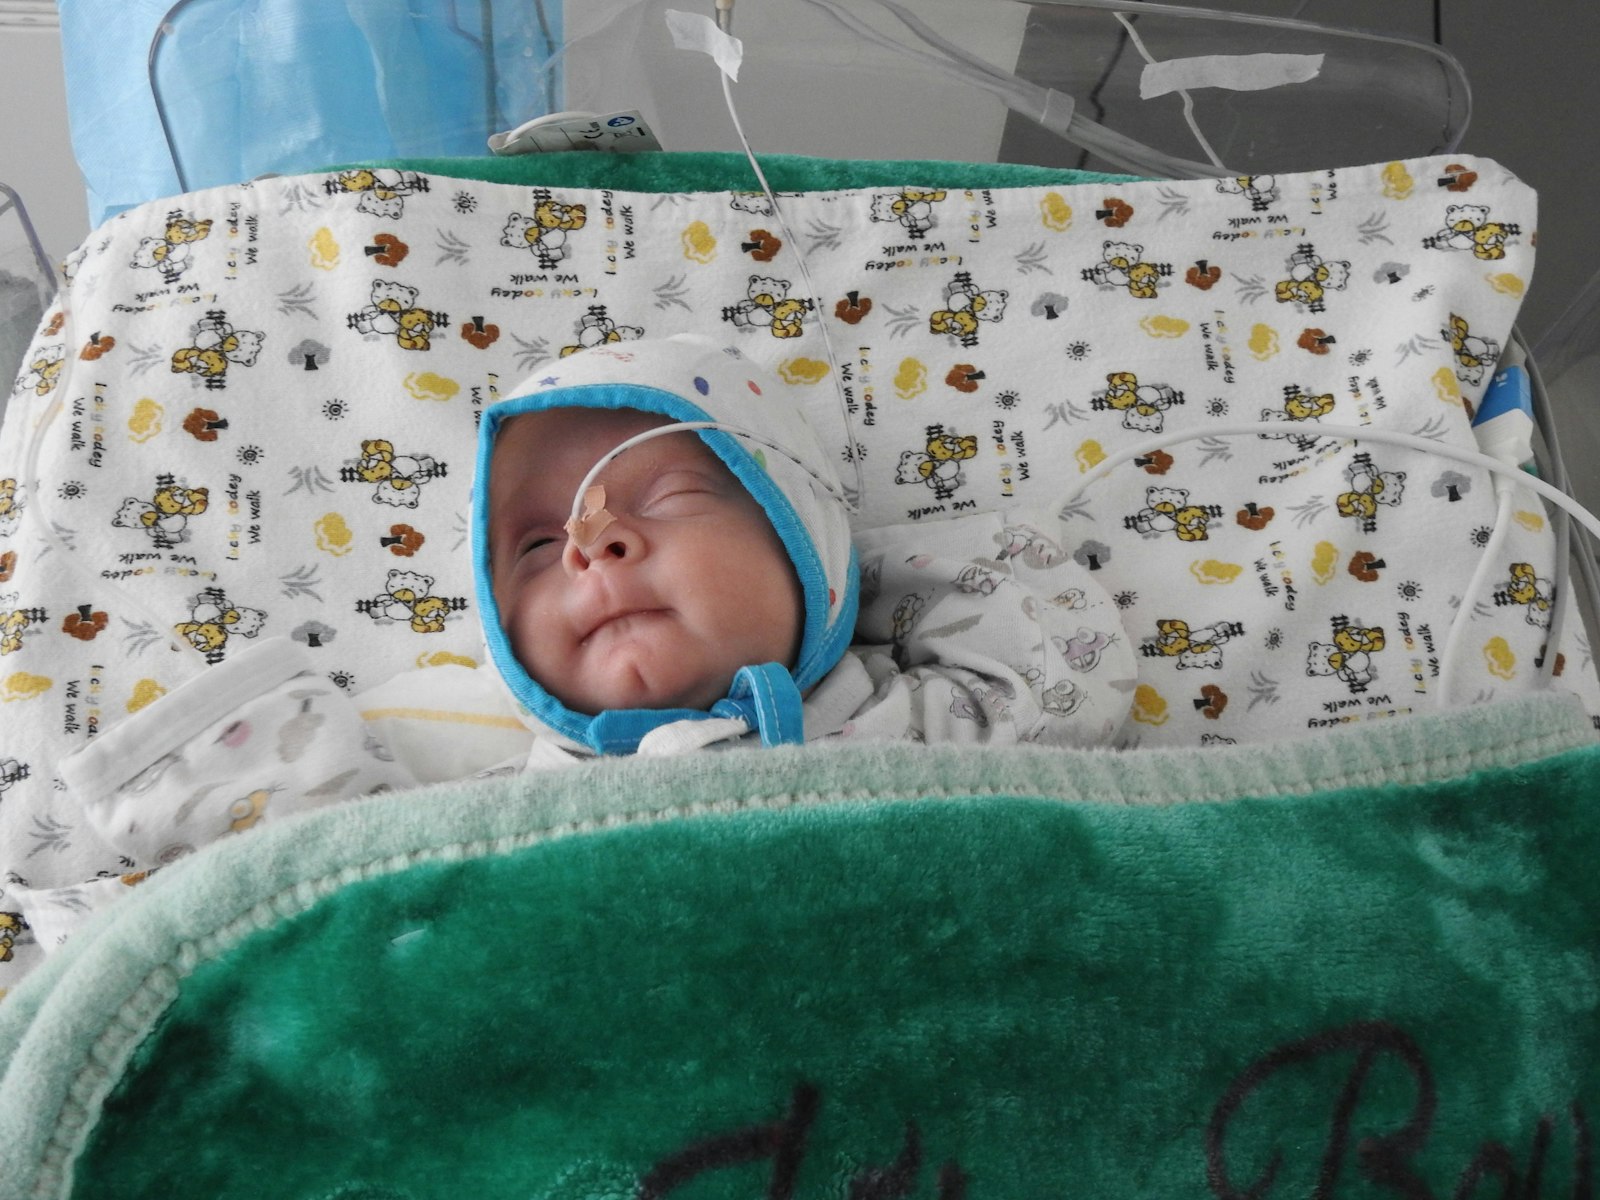 Born prematurely, Ismat was treated at the Aga Khan Medical Centre Khorog and is now home with his family. CASI / AKF